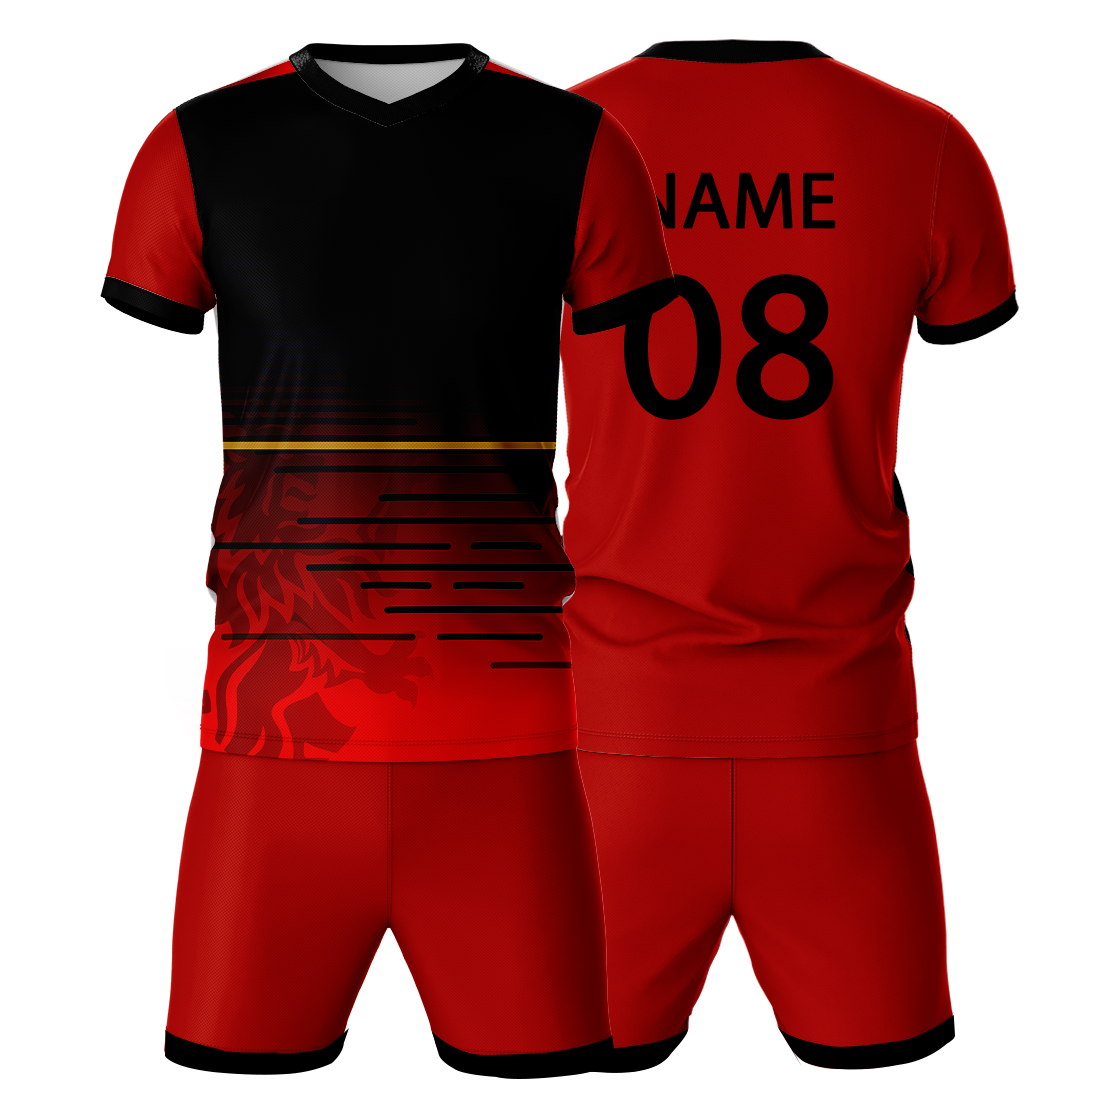 All Over Printed Jersey With Shorts Name & Number Printed.NP50000678